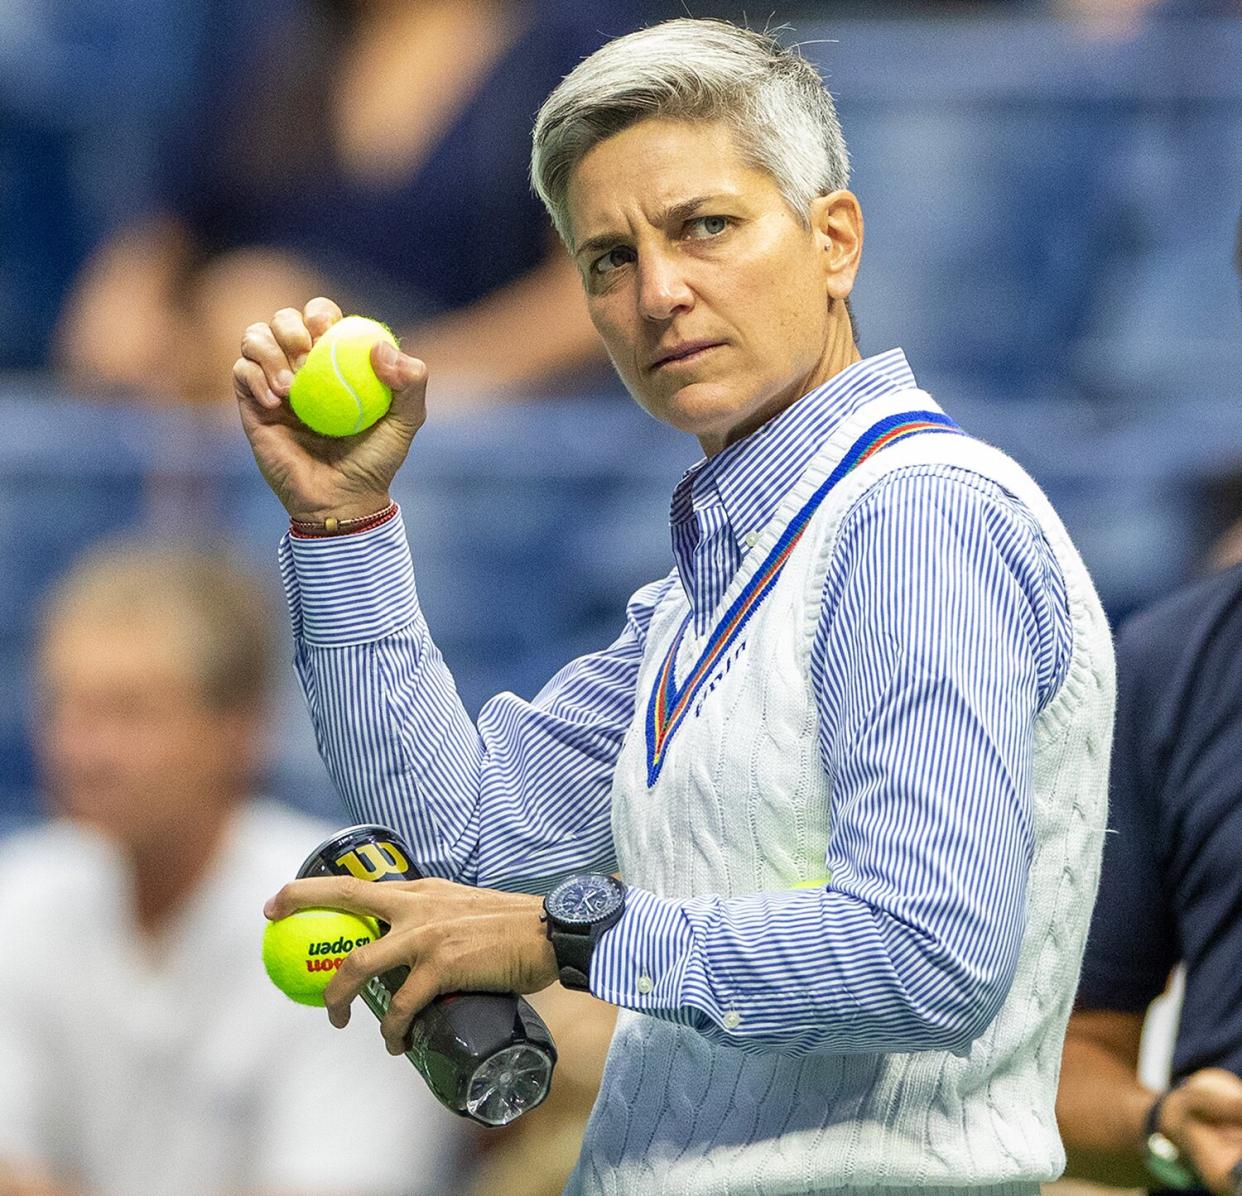 2019 US Open Tennis Tournament- Day Eleven. Tennis umpire Marija Cicak of Croatia checks the balls before the Serena Williams of the United States match against Elina Svitolina of the Ukraine in the Women's Singles Semi-Finals match on Arthur Ashe Stadium during the 2019 US Open Tennis Tournament at the USTA Billie Jean King National Tennis Center on September 5th, 2019 in Flushing, Queens, New York City.